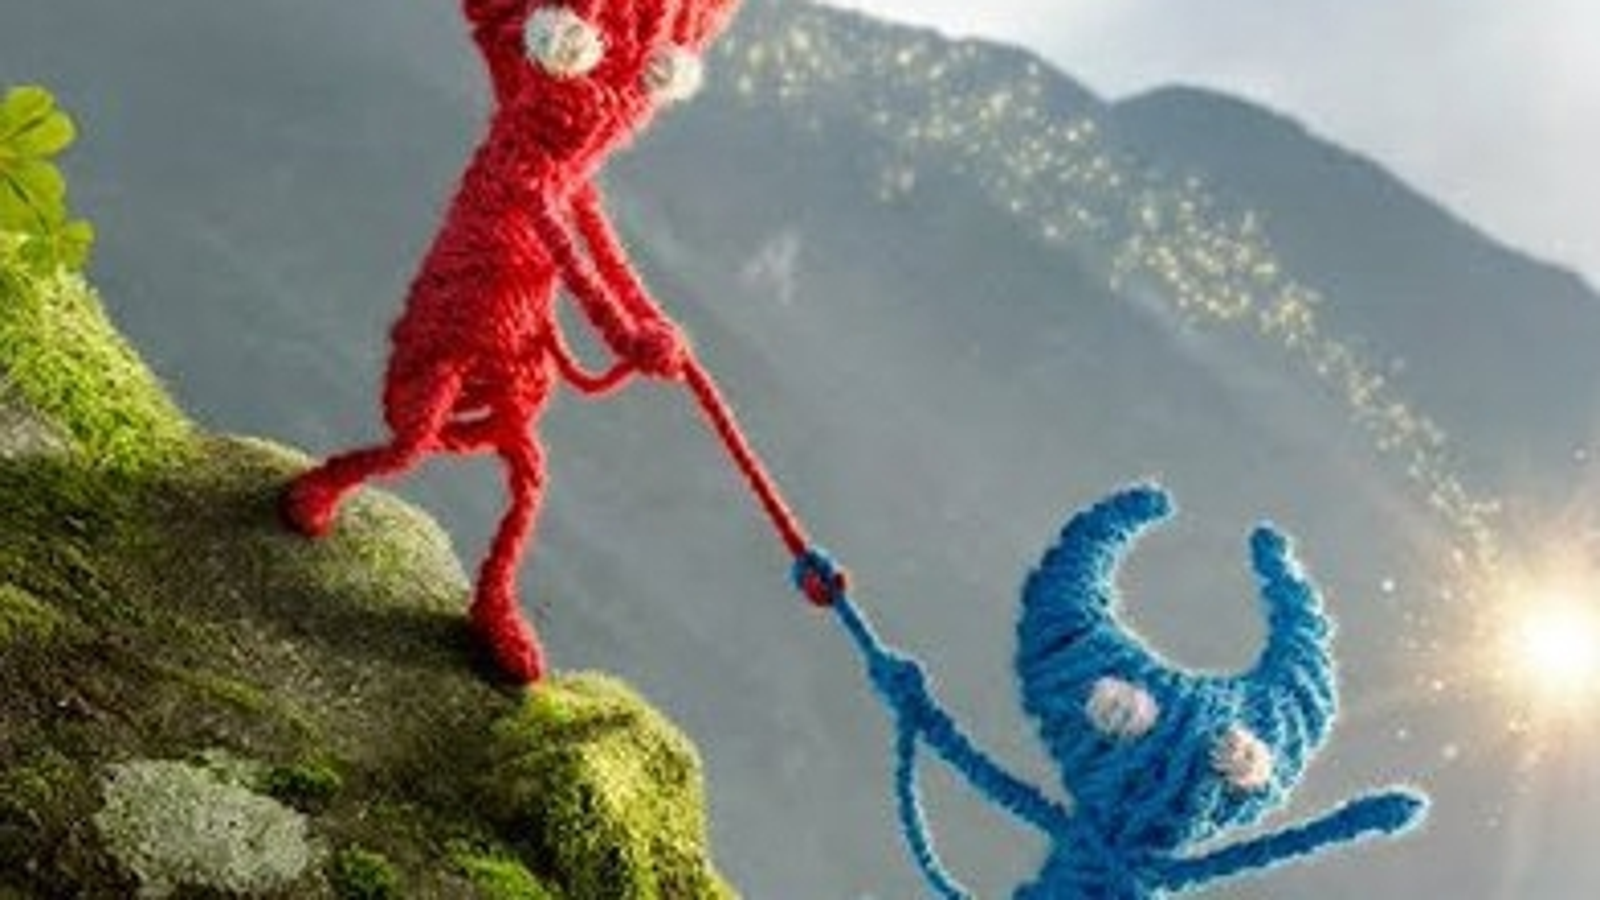 HD wallpaper: Video Game, Unravel Two